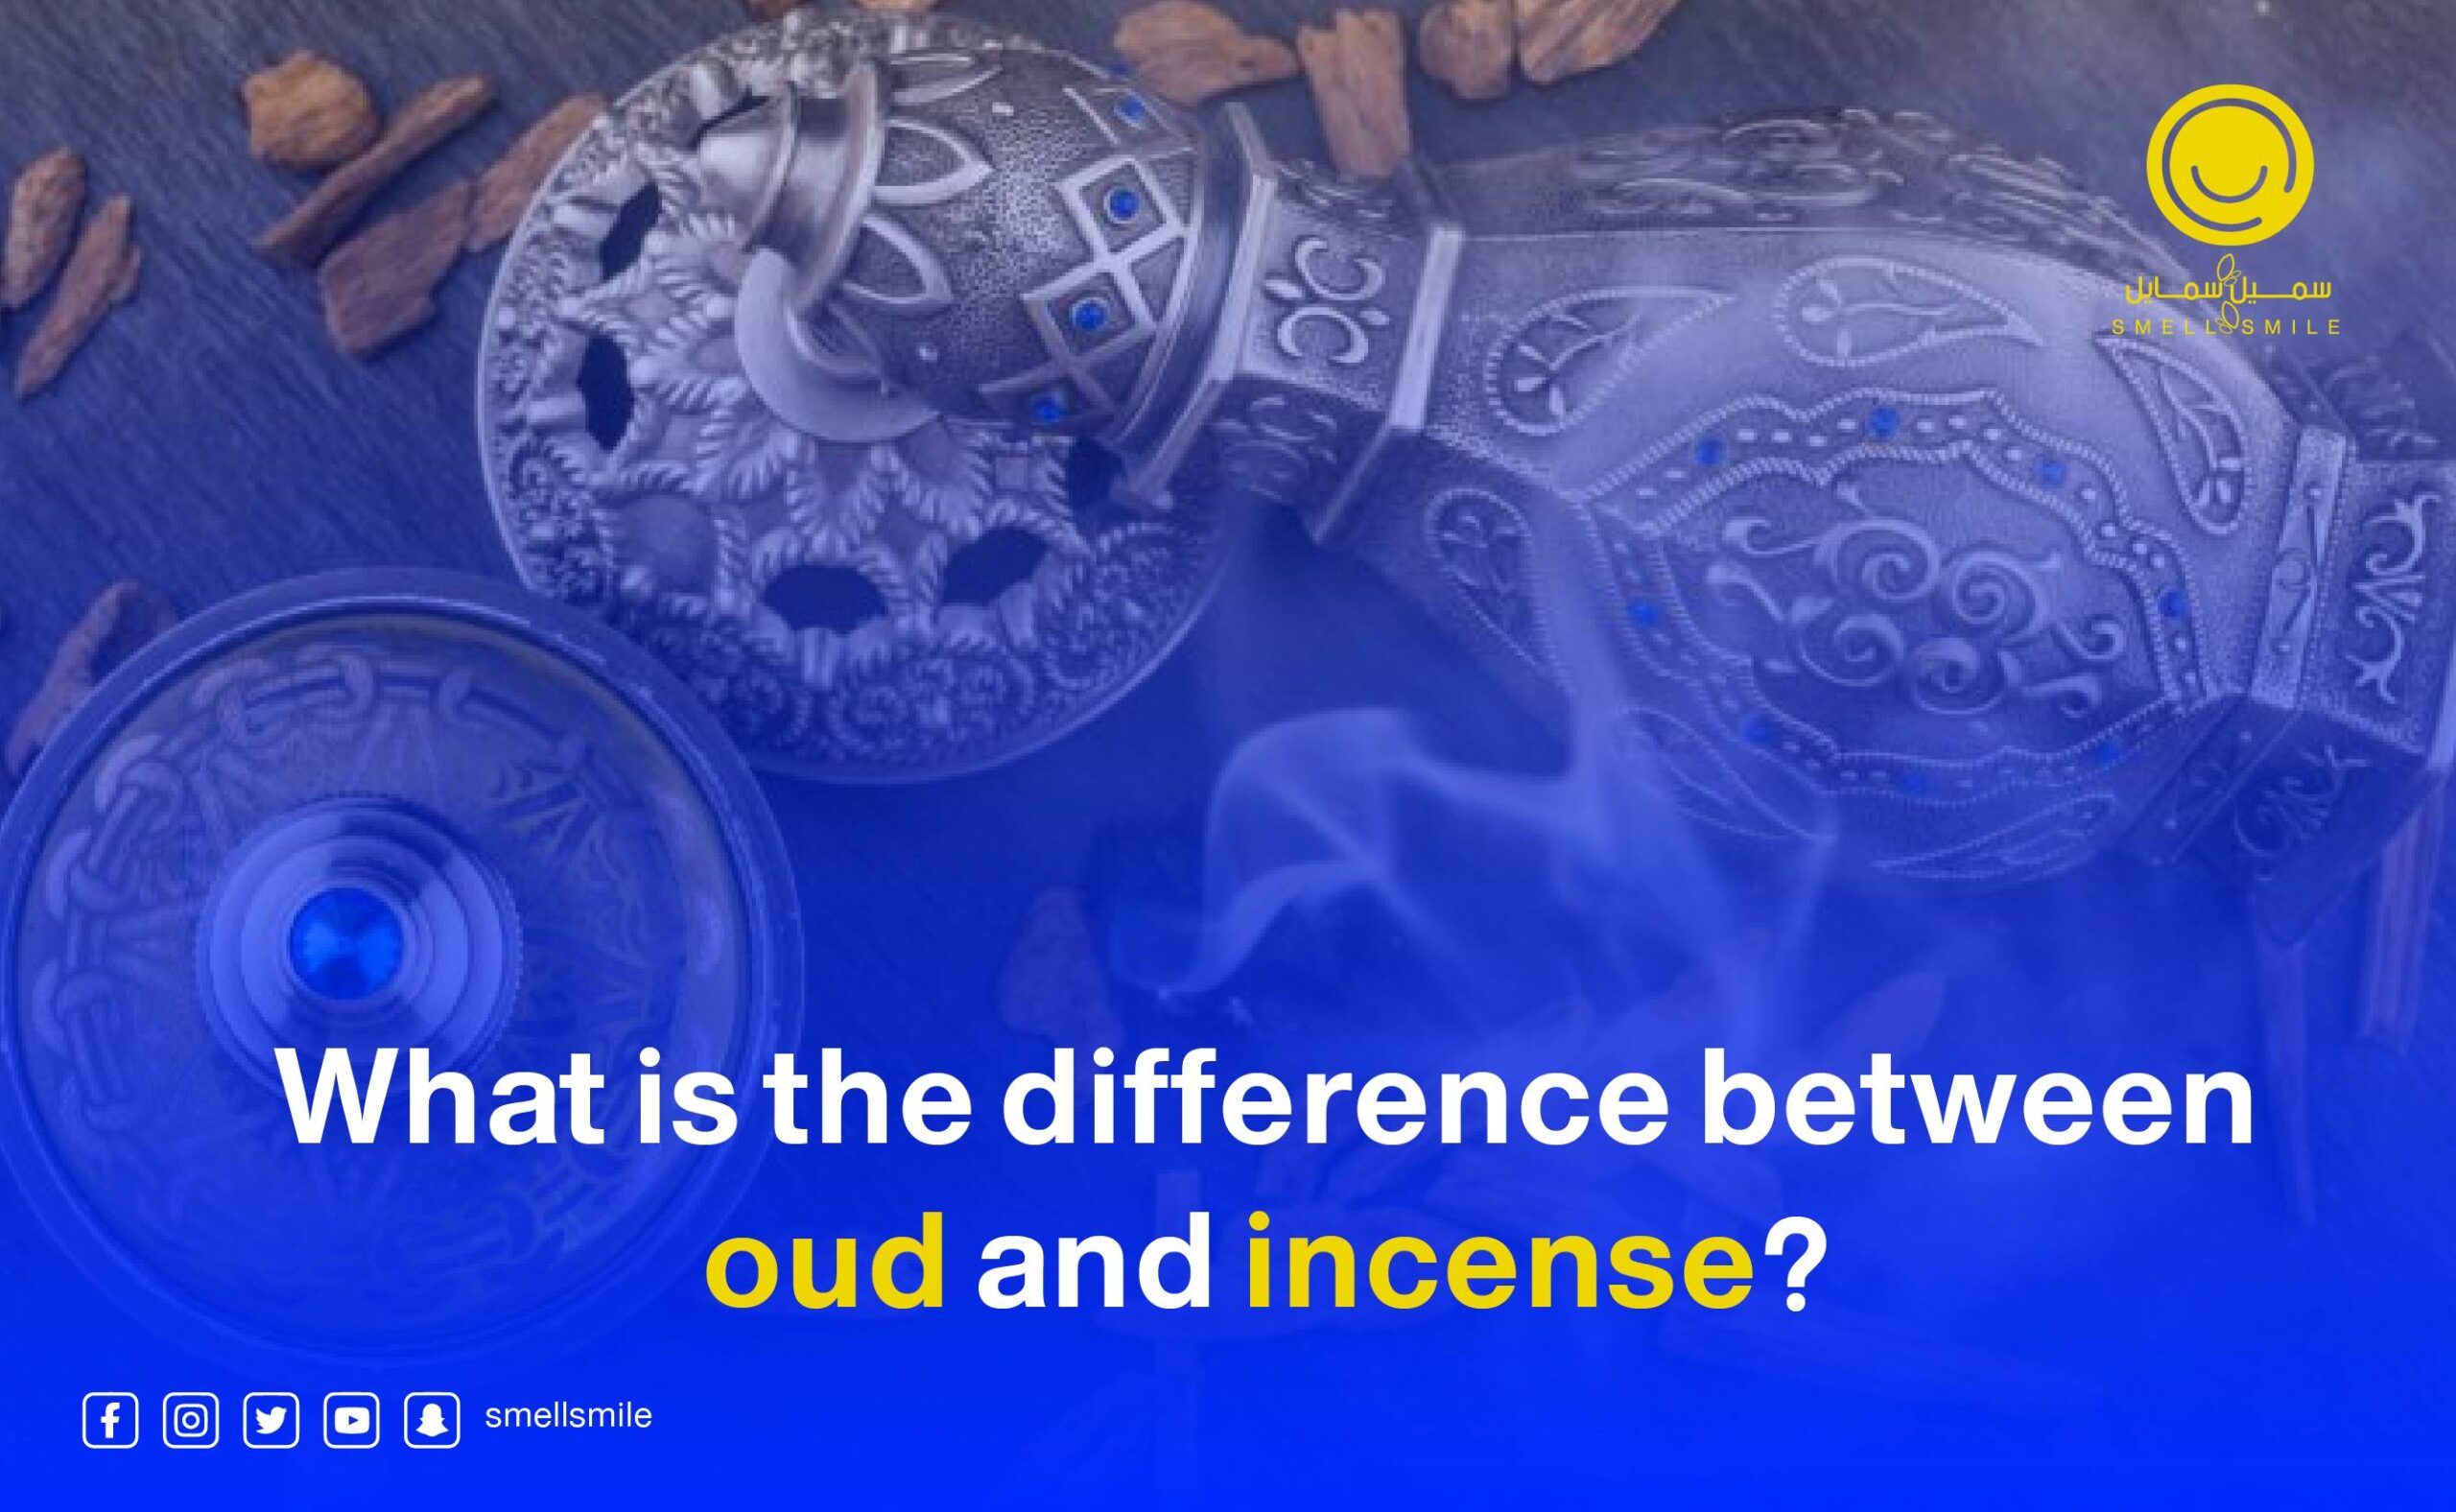 The difference between incense and oud